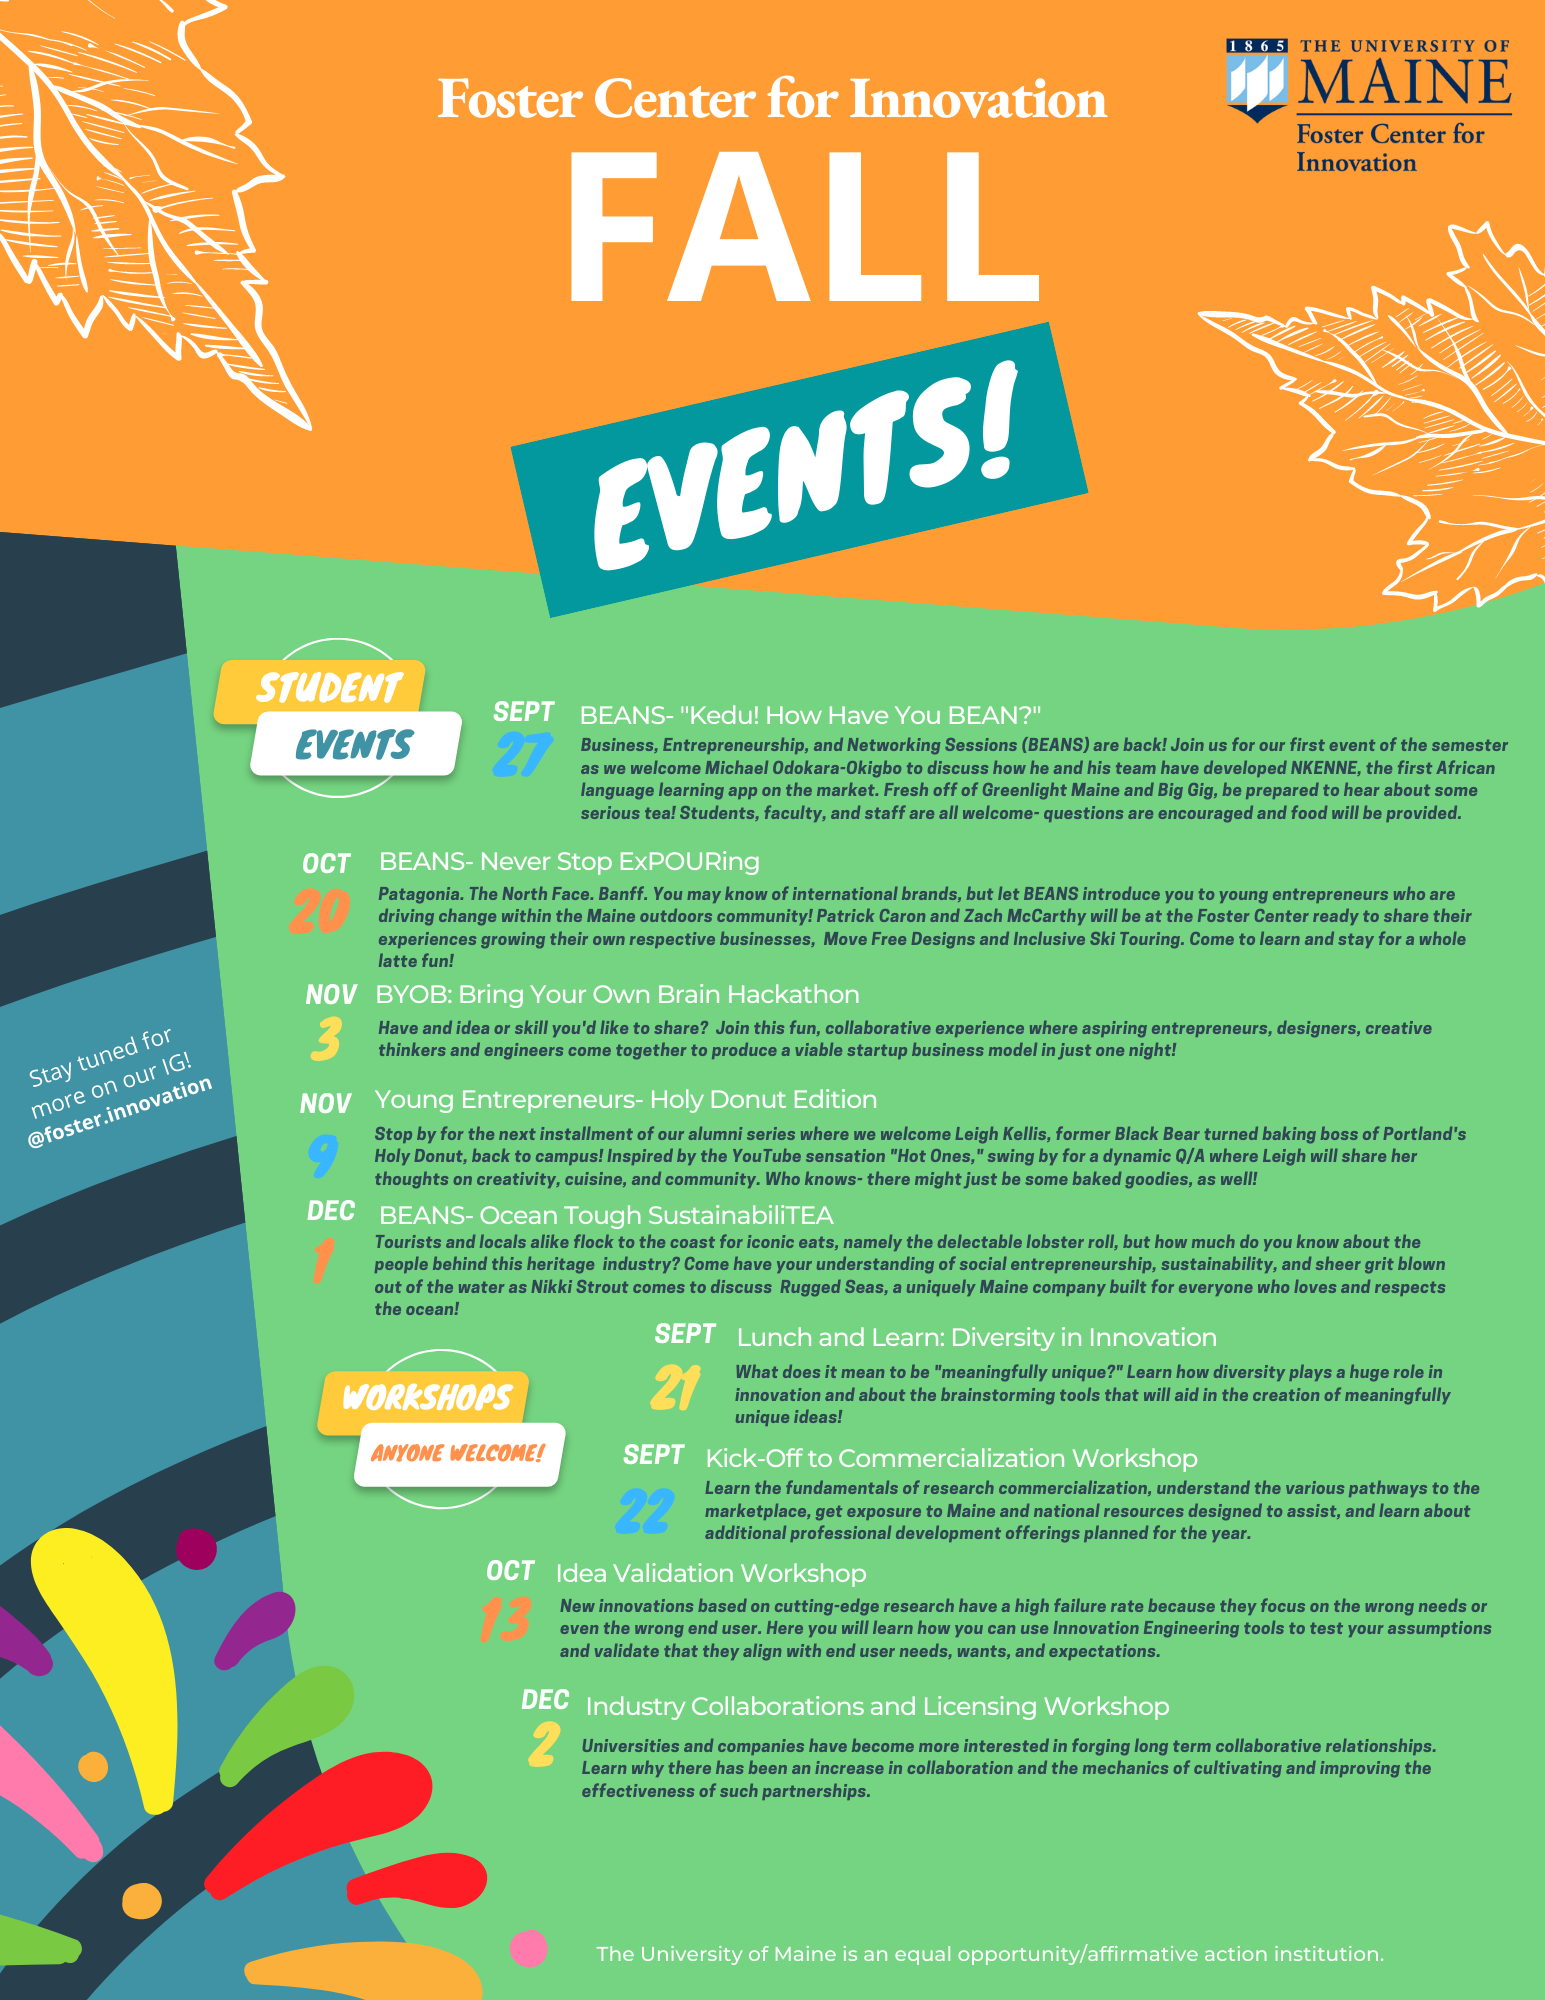 Foster Center fall 2022 events flyer listing event dates and names.